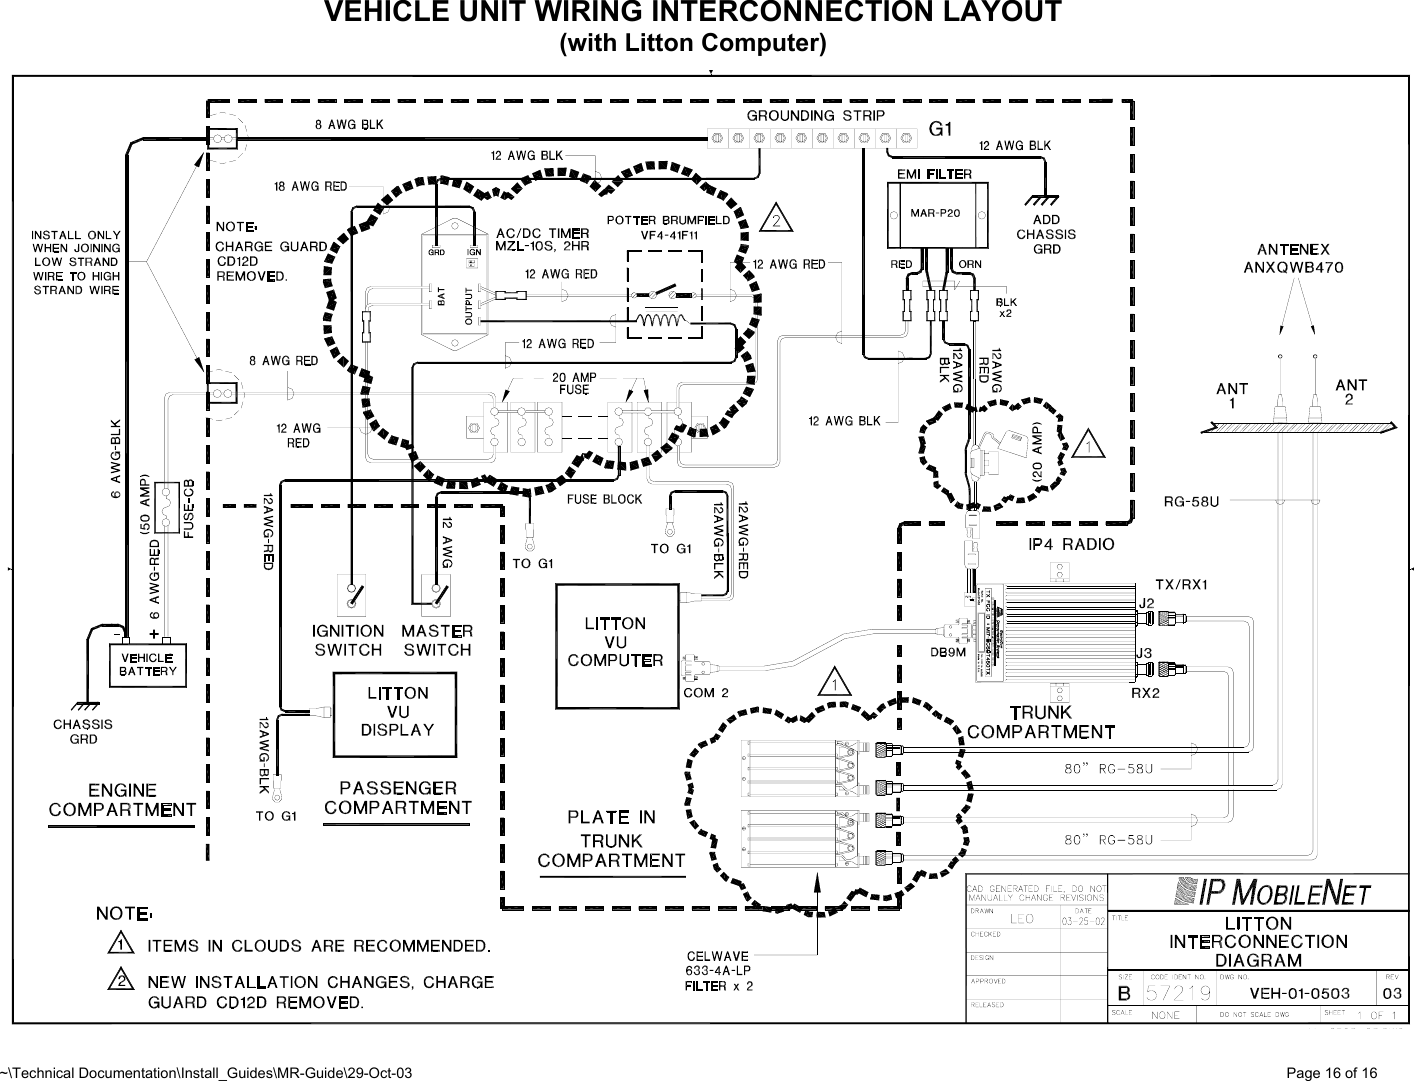 ~\Technical Documentation\Install_Guides\MR-Guide\29-Oct-03   Page 16 of 16 VEHICLE UNIT WIRING INTERCONNECTION LAYOUT (with Litton Computer)         